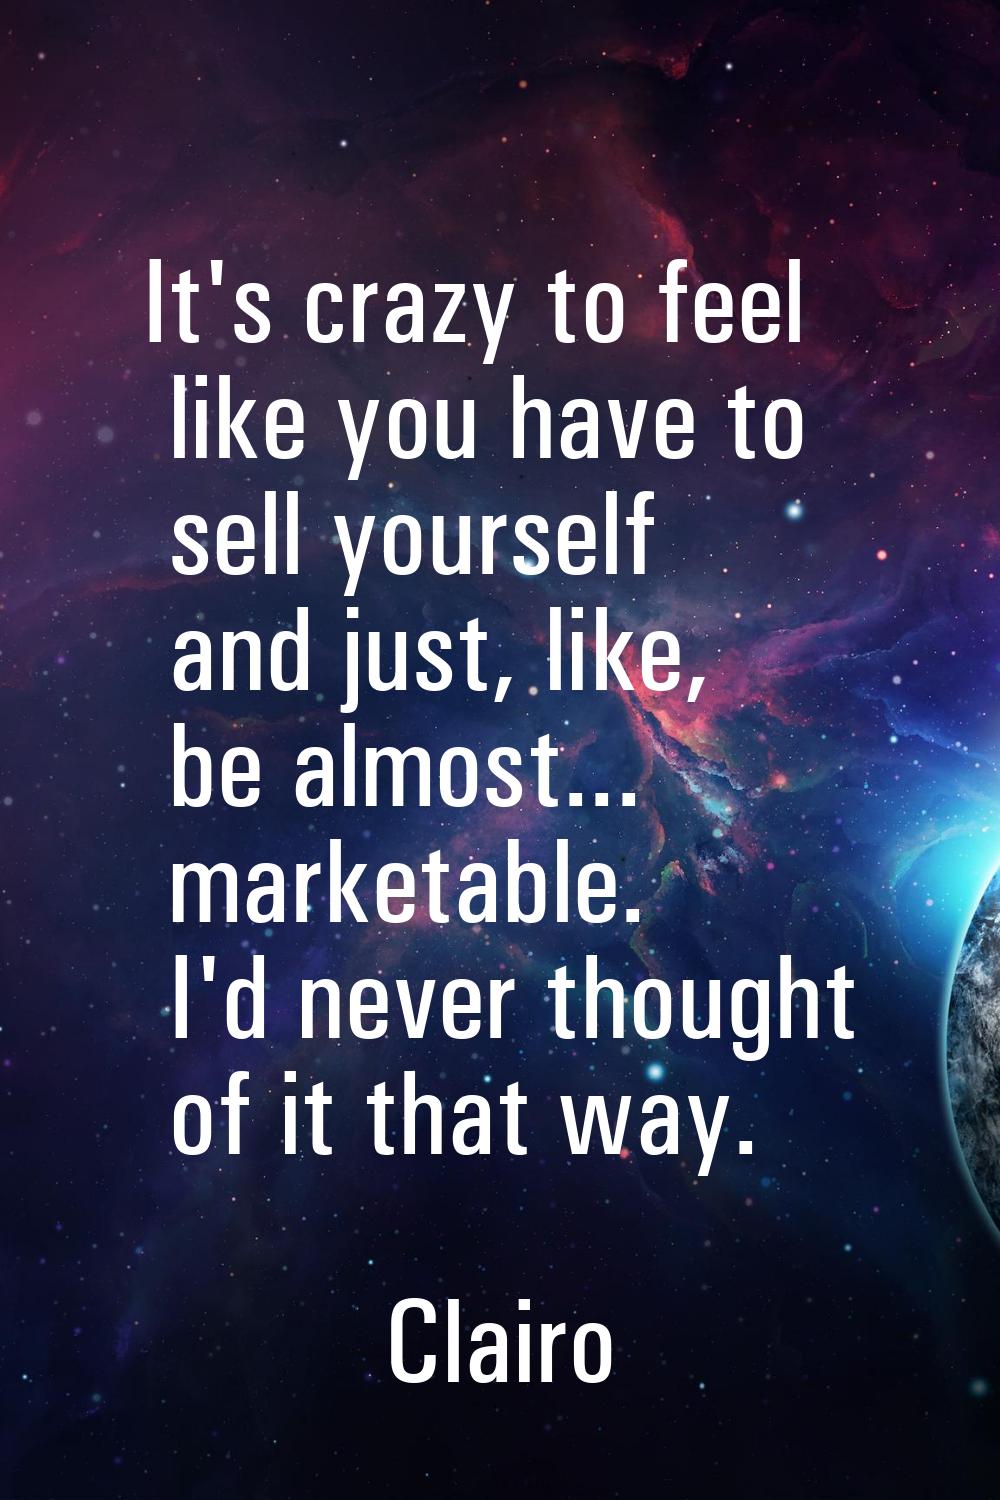 It's crazy to feel like you have to sell yourself and just, like, be almost... marketable. I'd neve